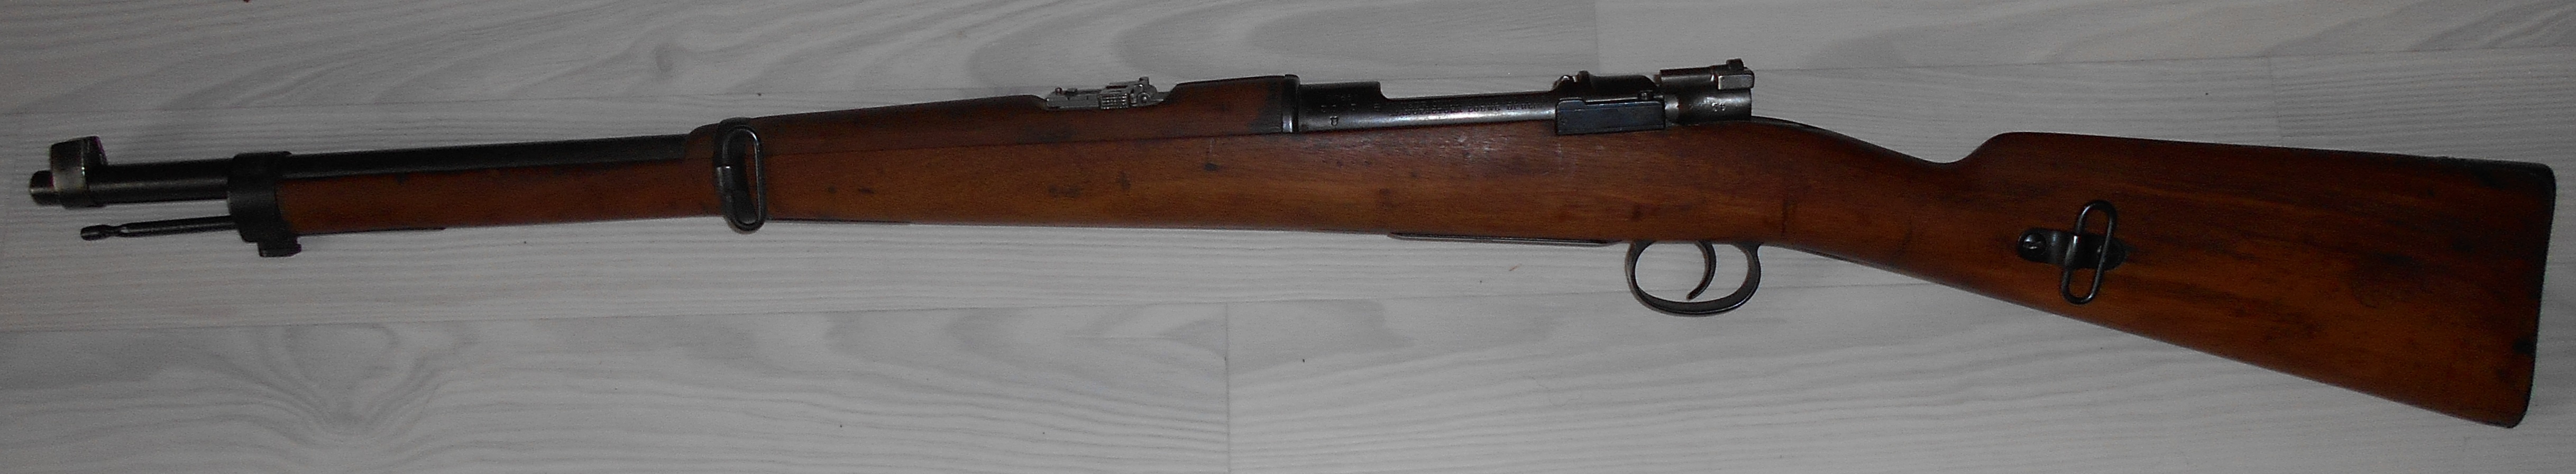 Mauser Chilien 1895 (carabine)